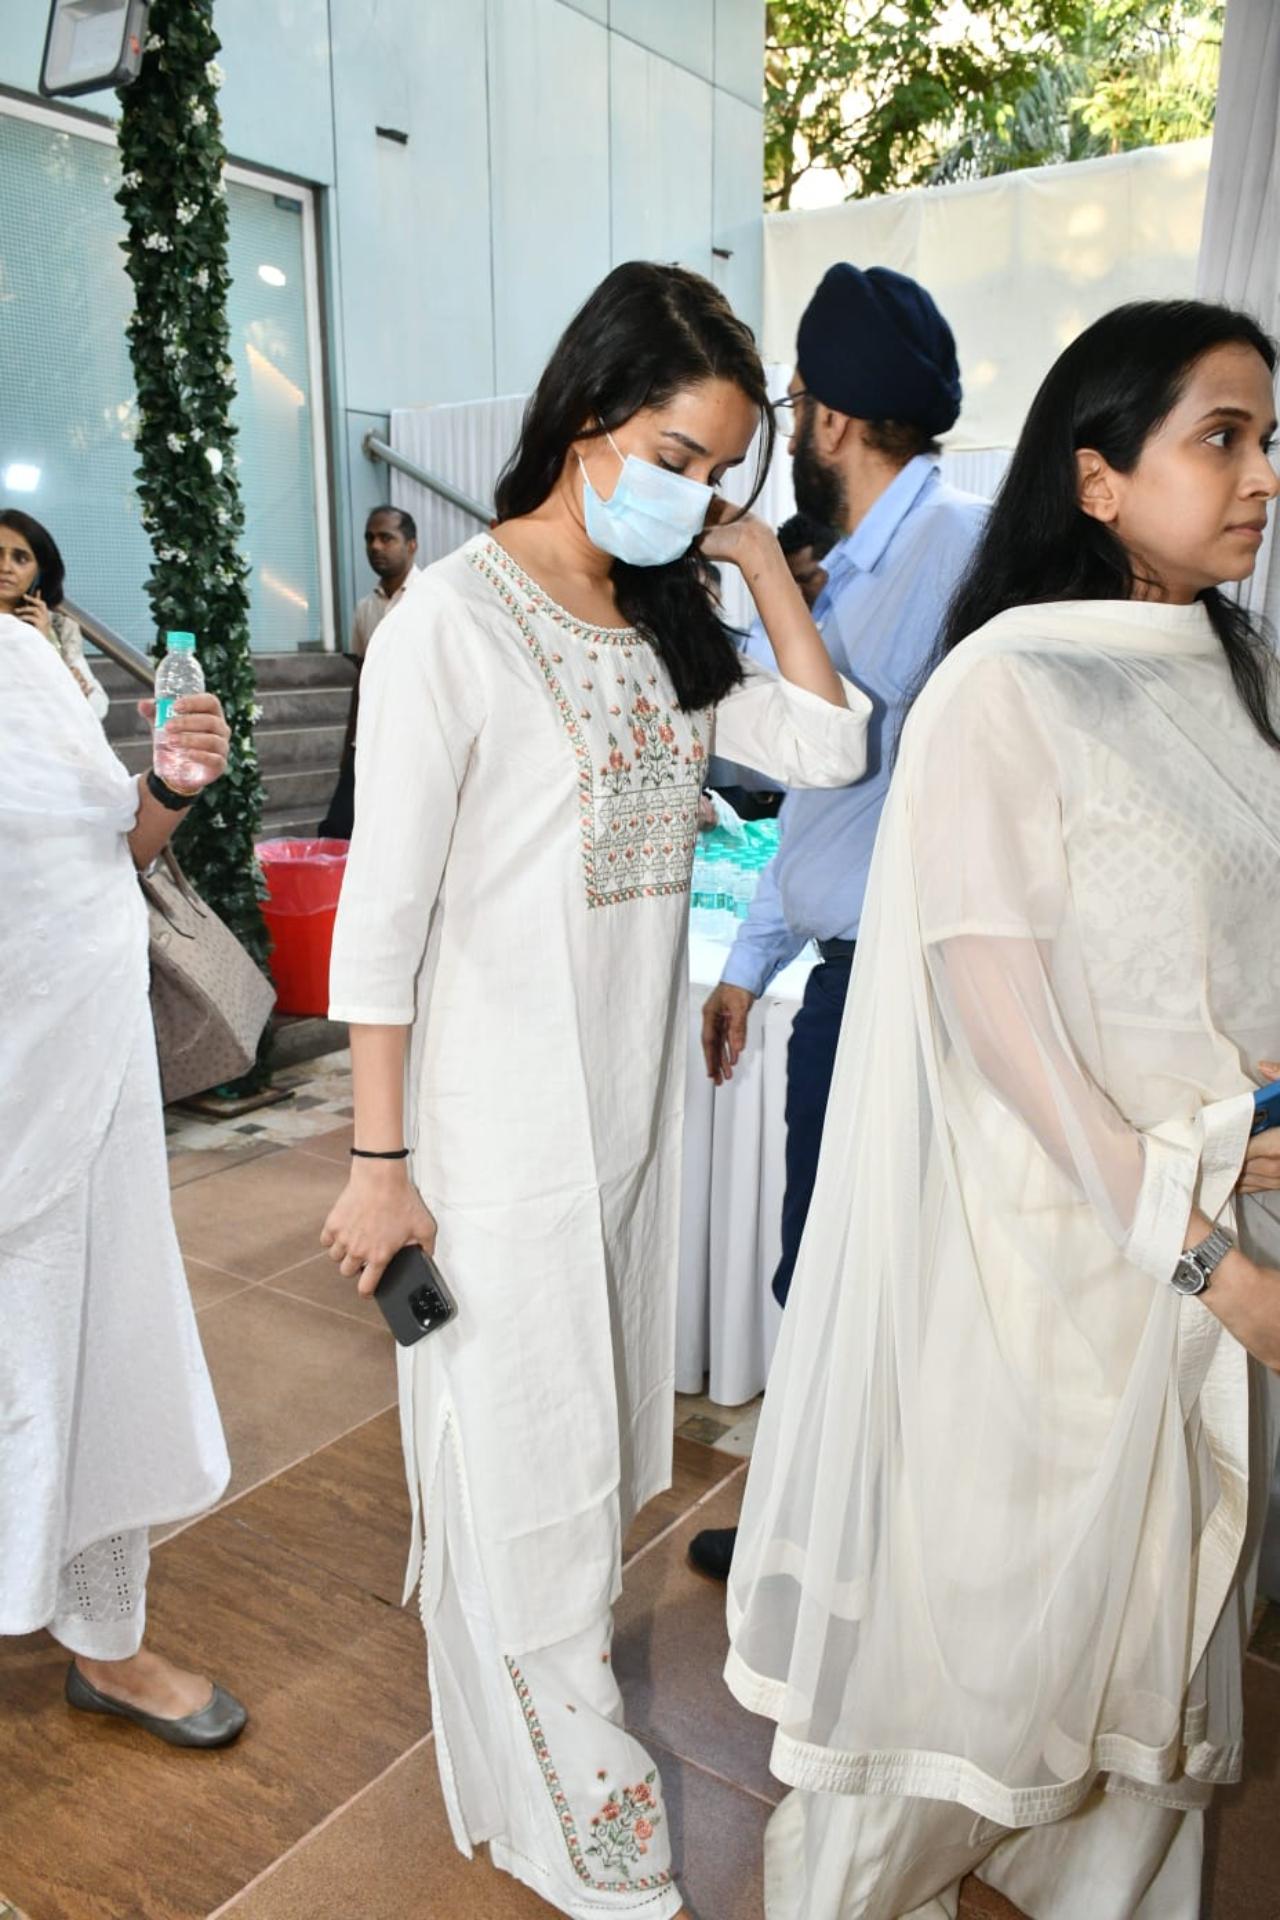 Shraddha Kapoor was spotted leaving after the prayer meet wearing a face mask